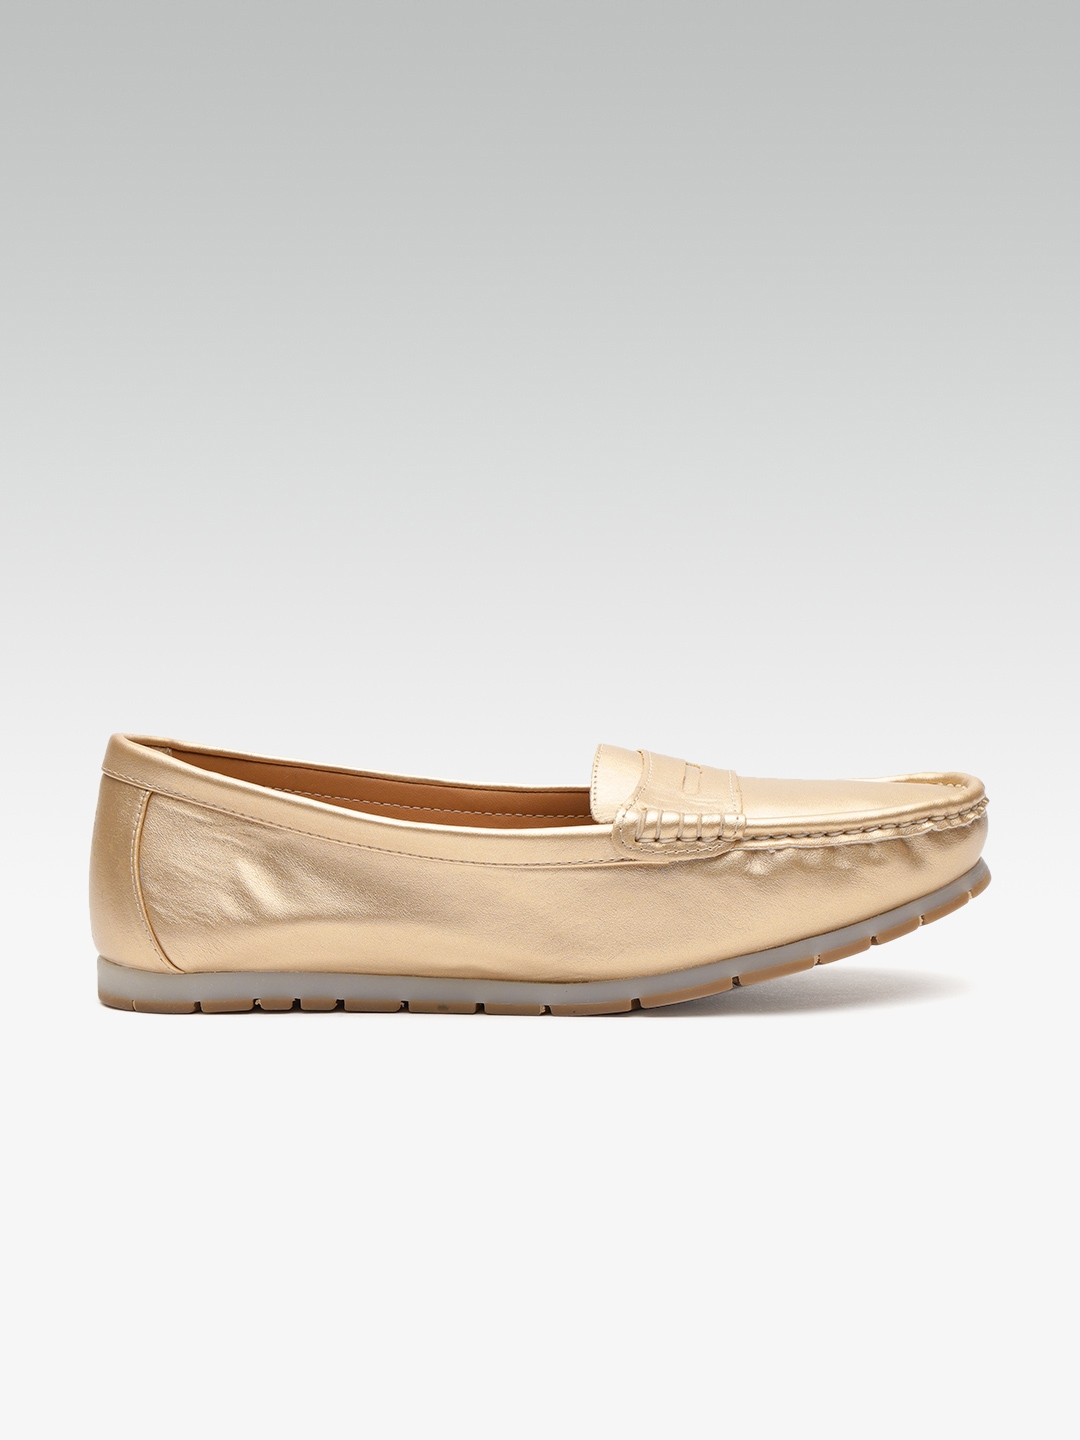 carlton london women's loafers and moccasins